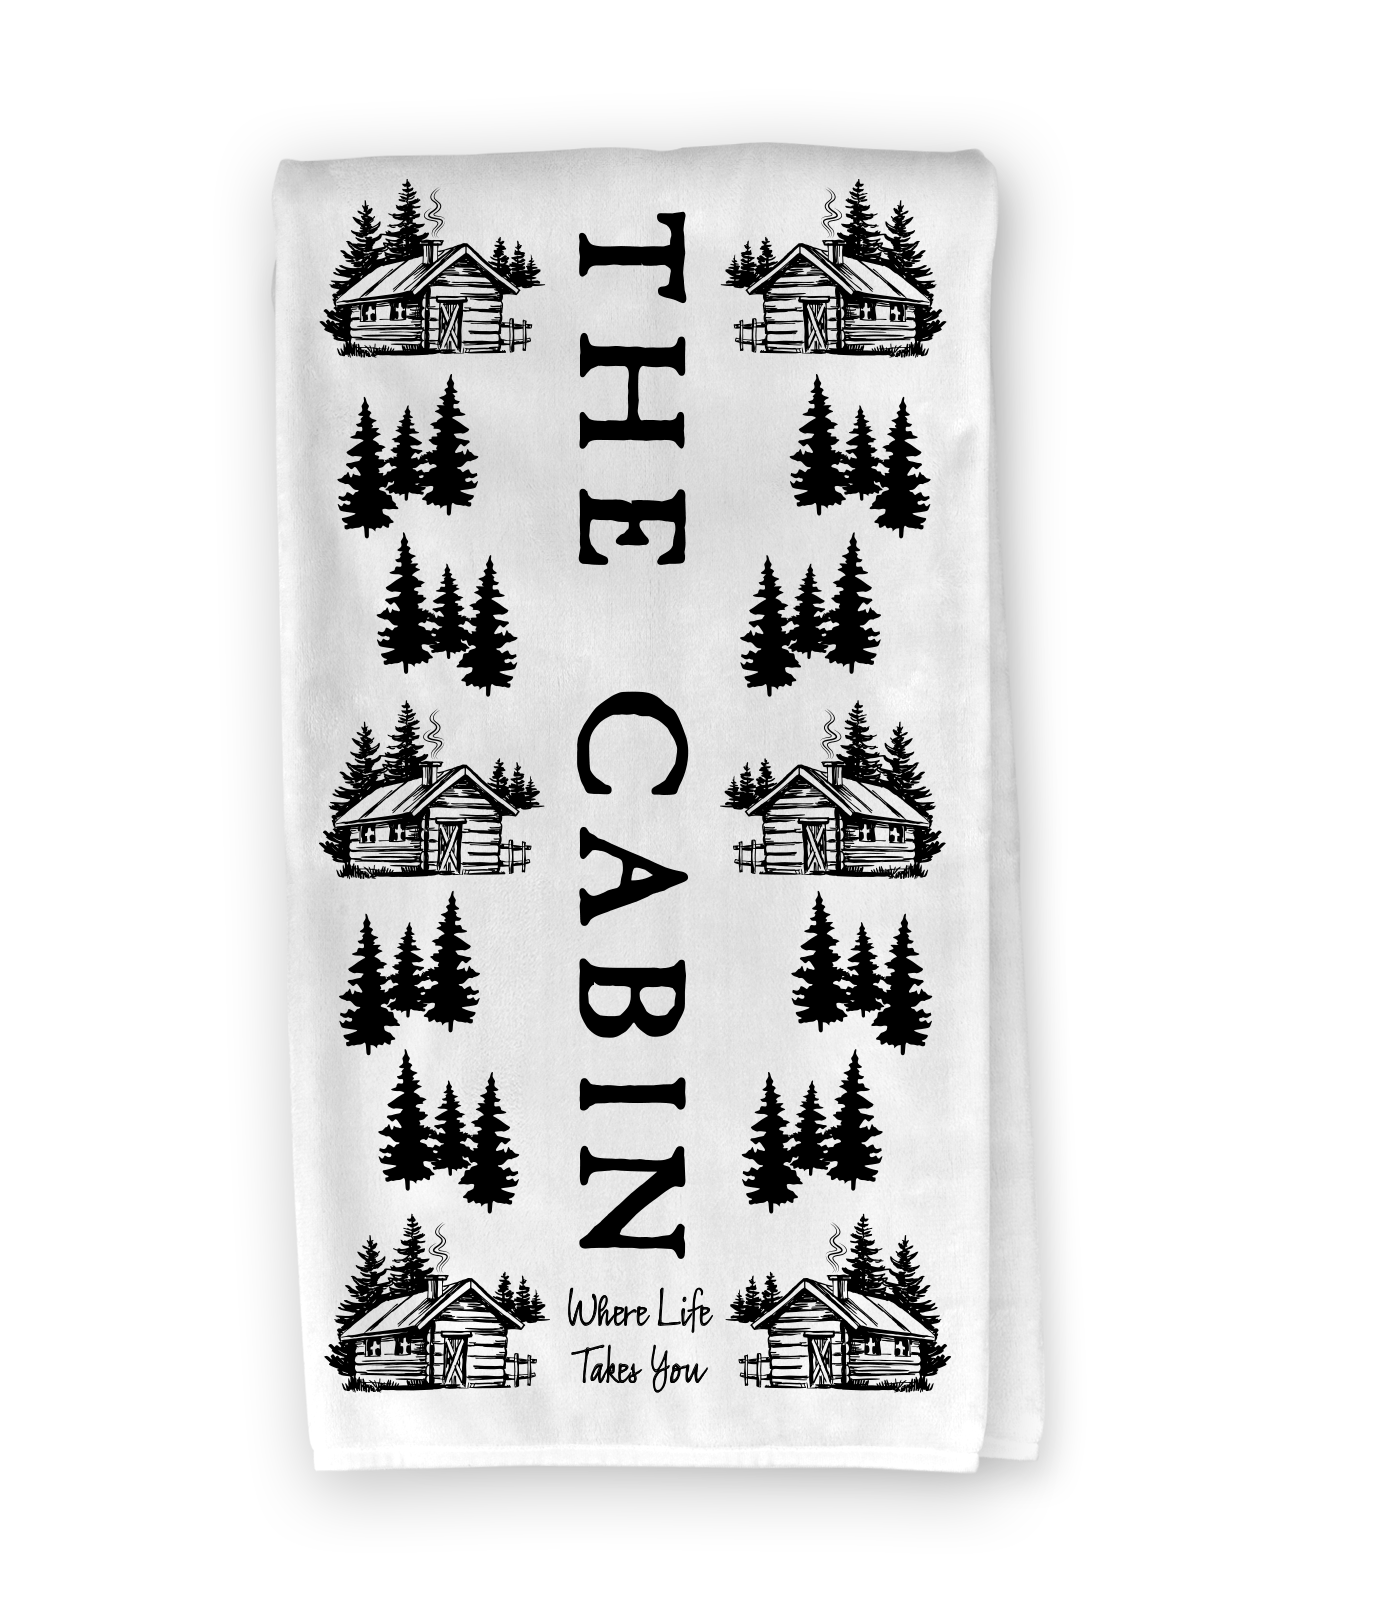 The Cabin Adventure Kitchen Towel - Where Life Takes You